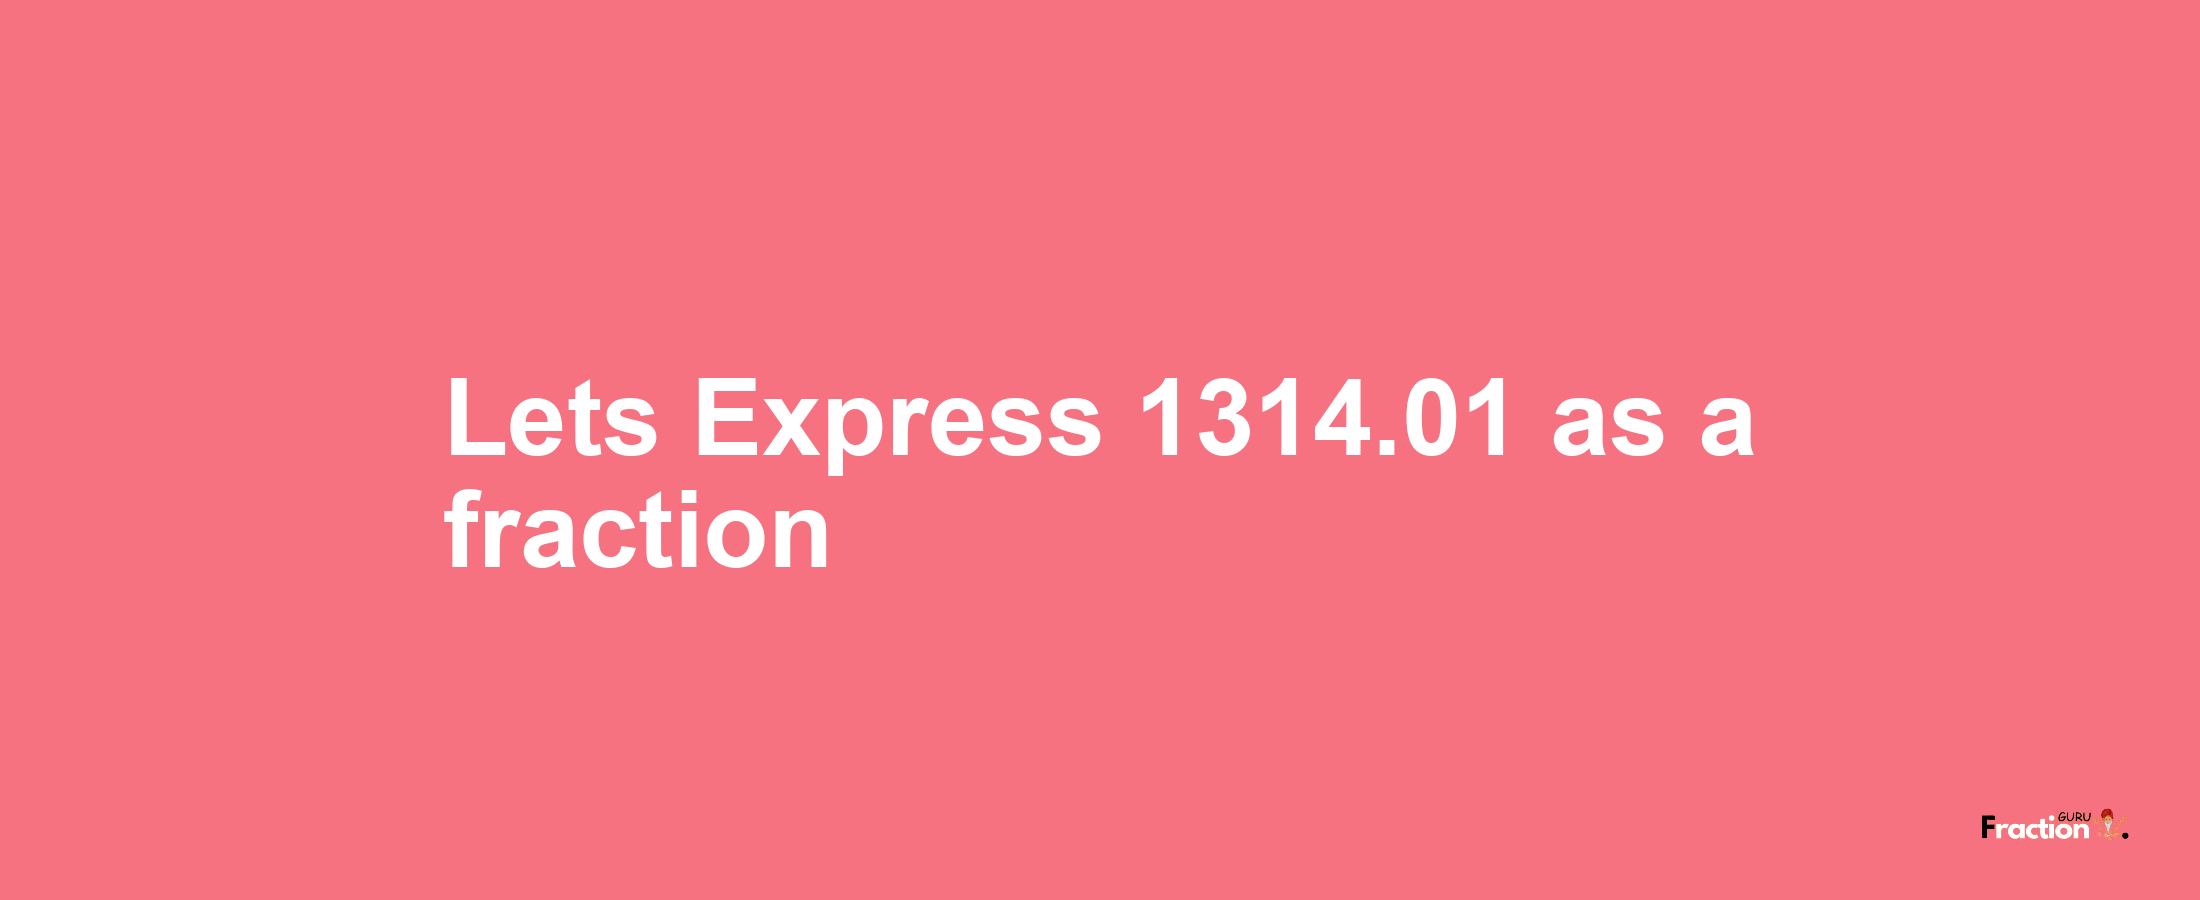 Lets Express 1314.01 as afraction